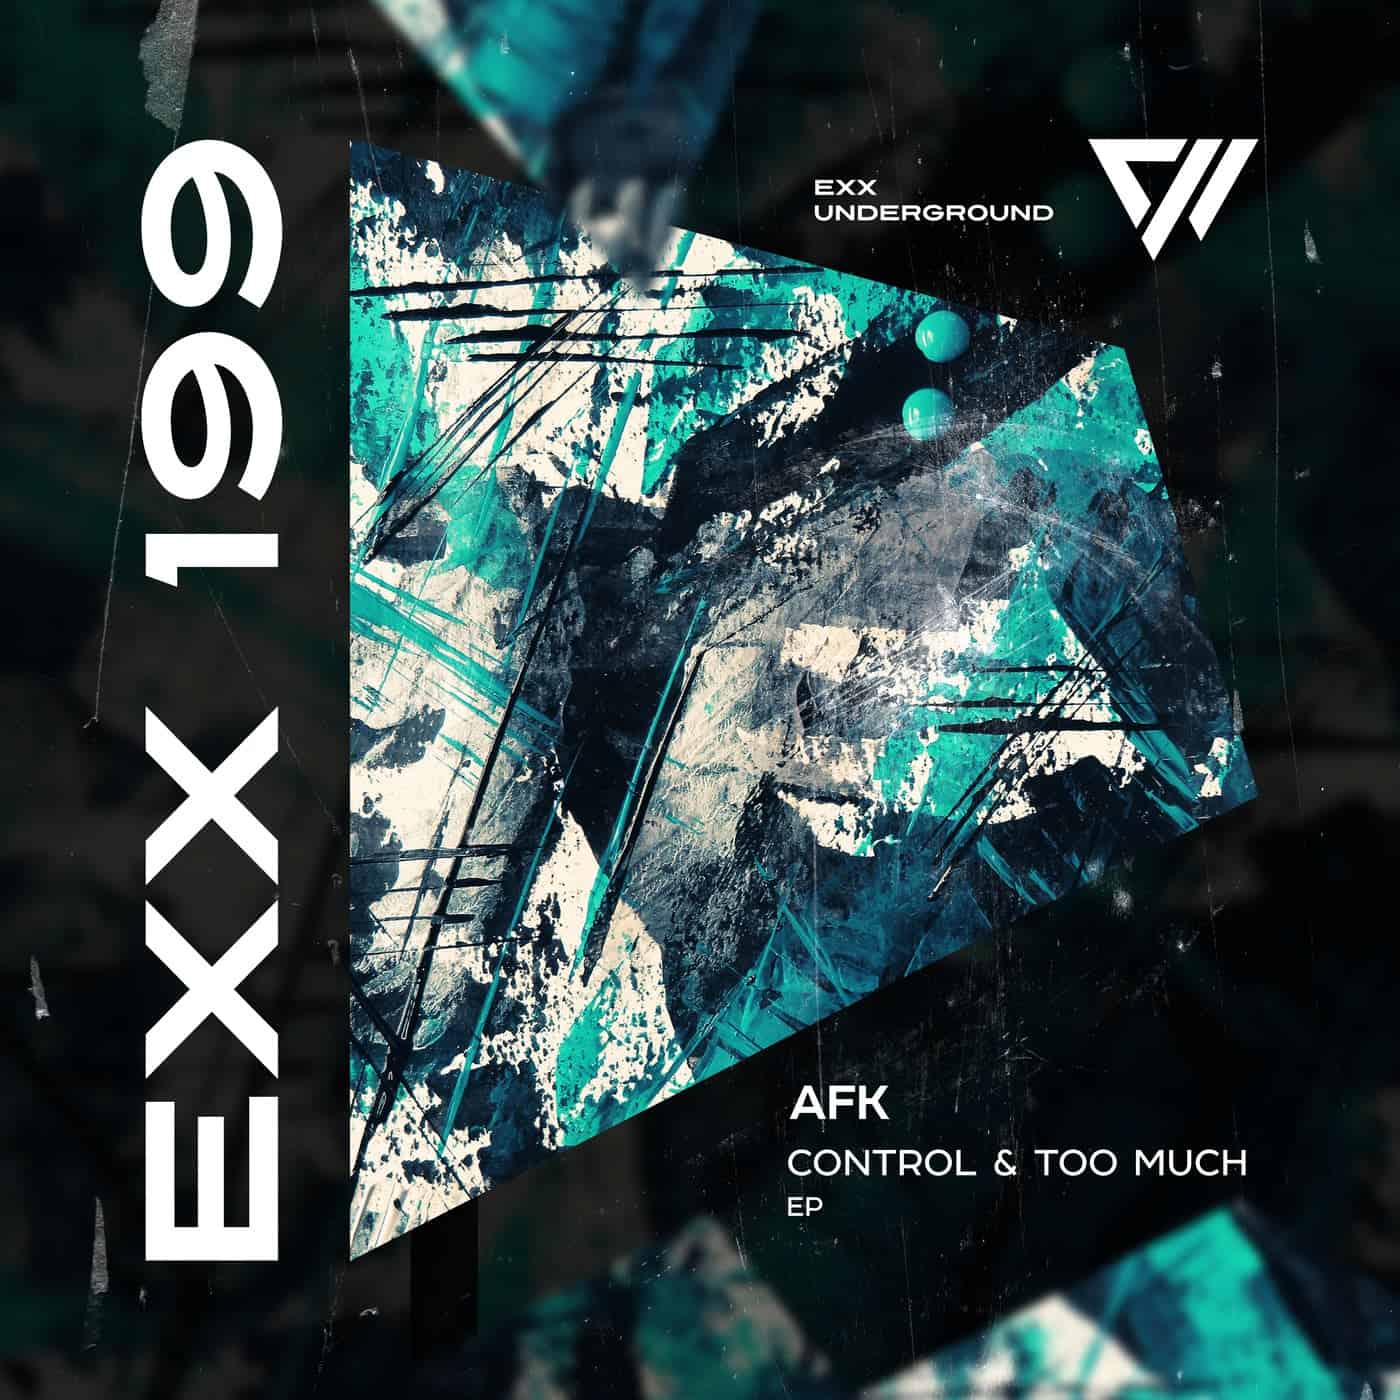 image cover: Control & Too Much by AFK (LB) on Exx Underground